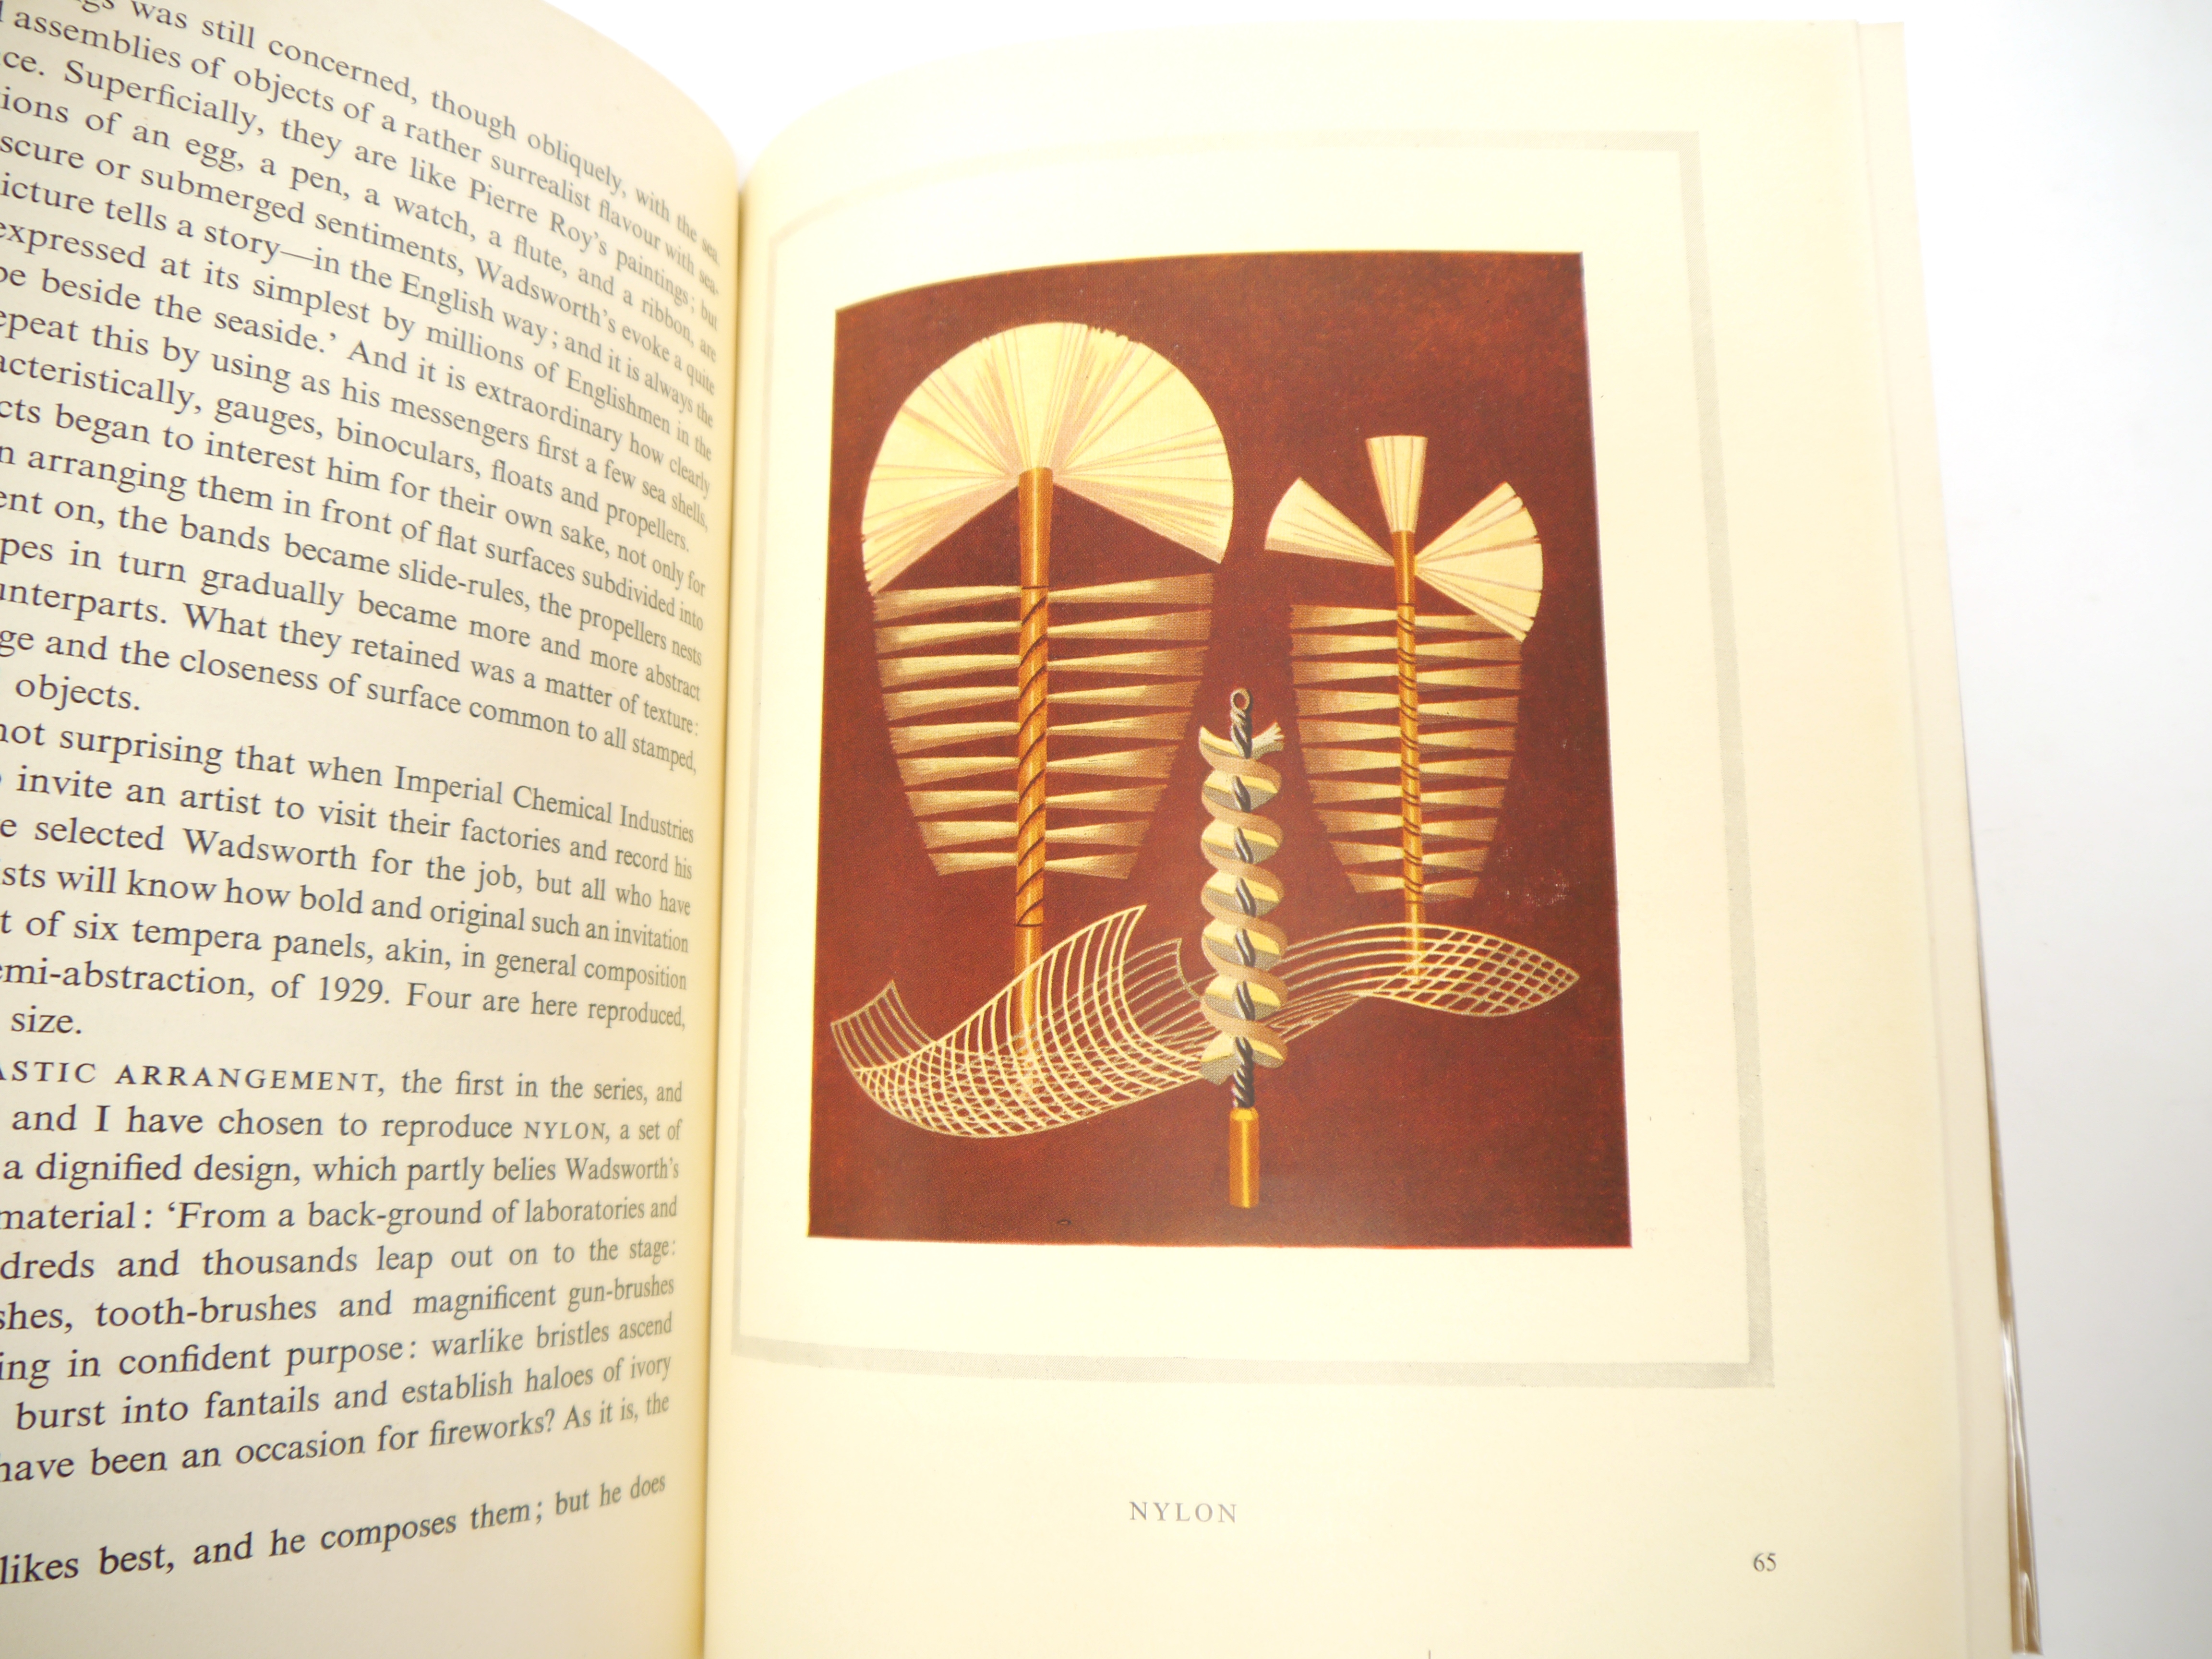 (Typography, Printing, Illustration, Early Ian Fleming in Print.), 'Alphabet & Image', Shenval - Image 28 of 31